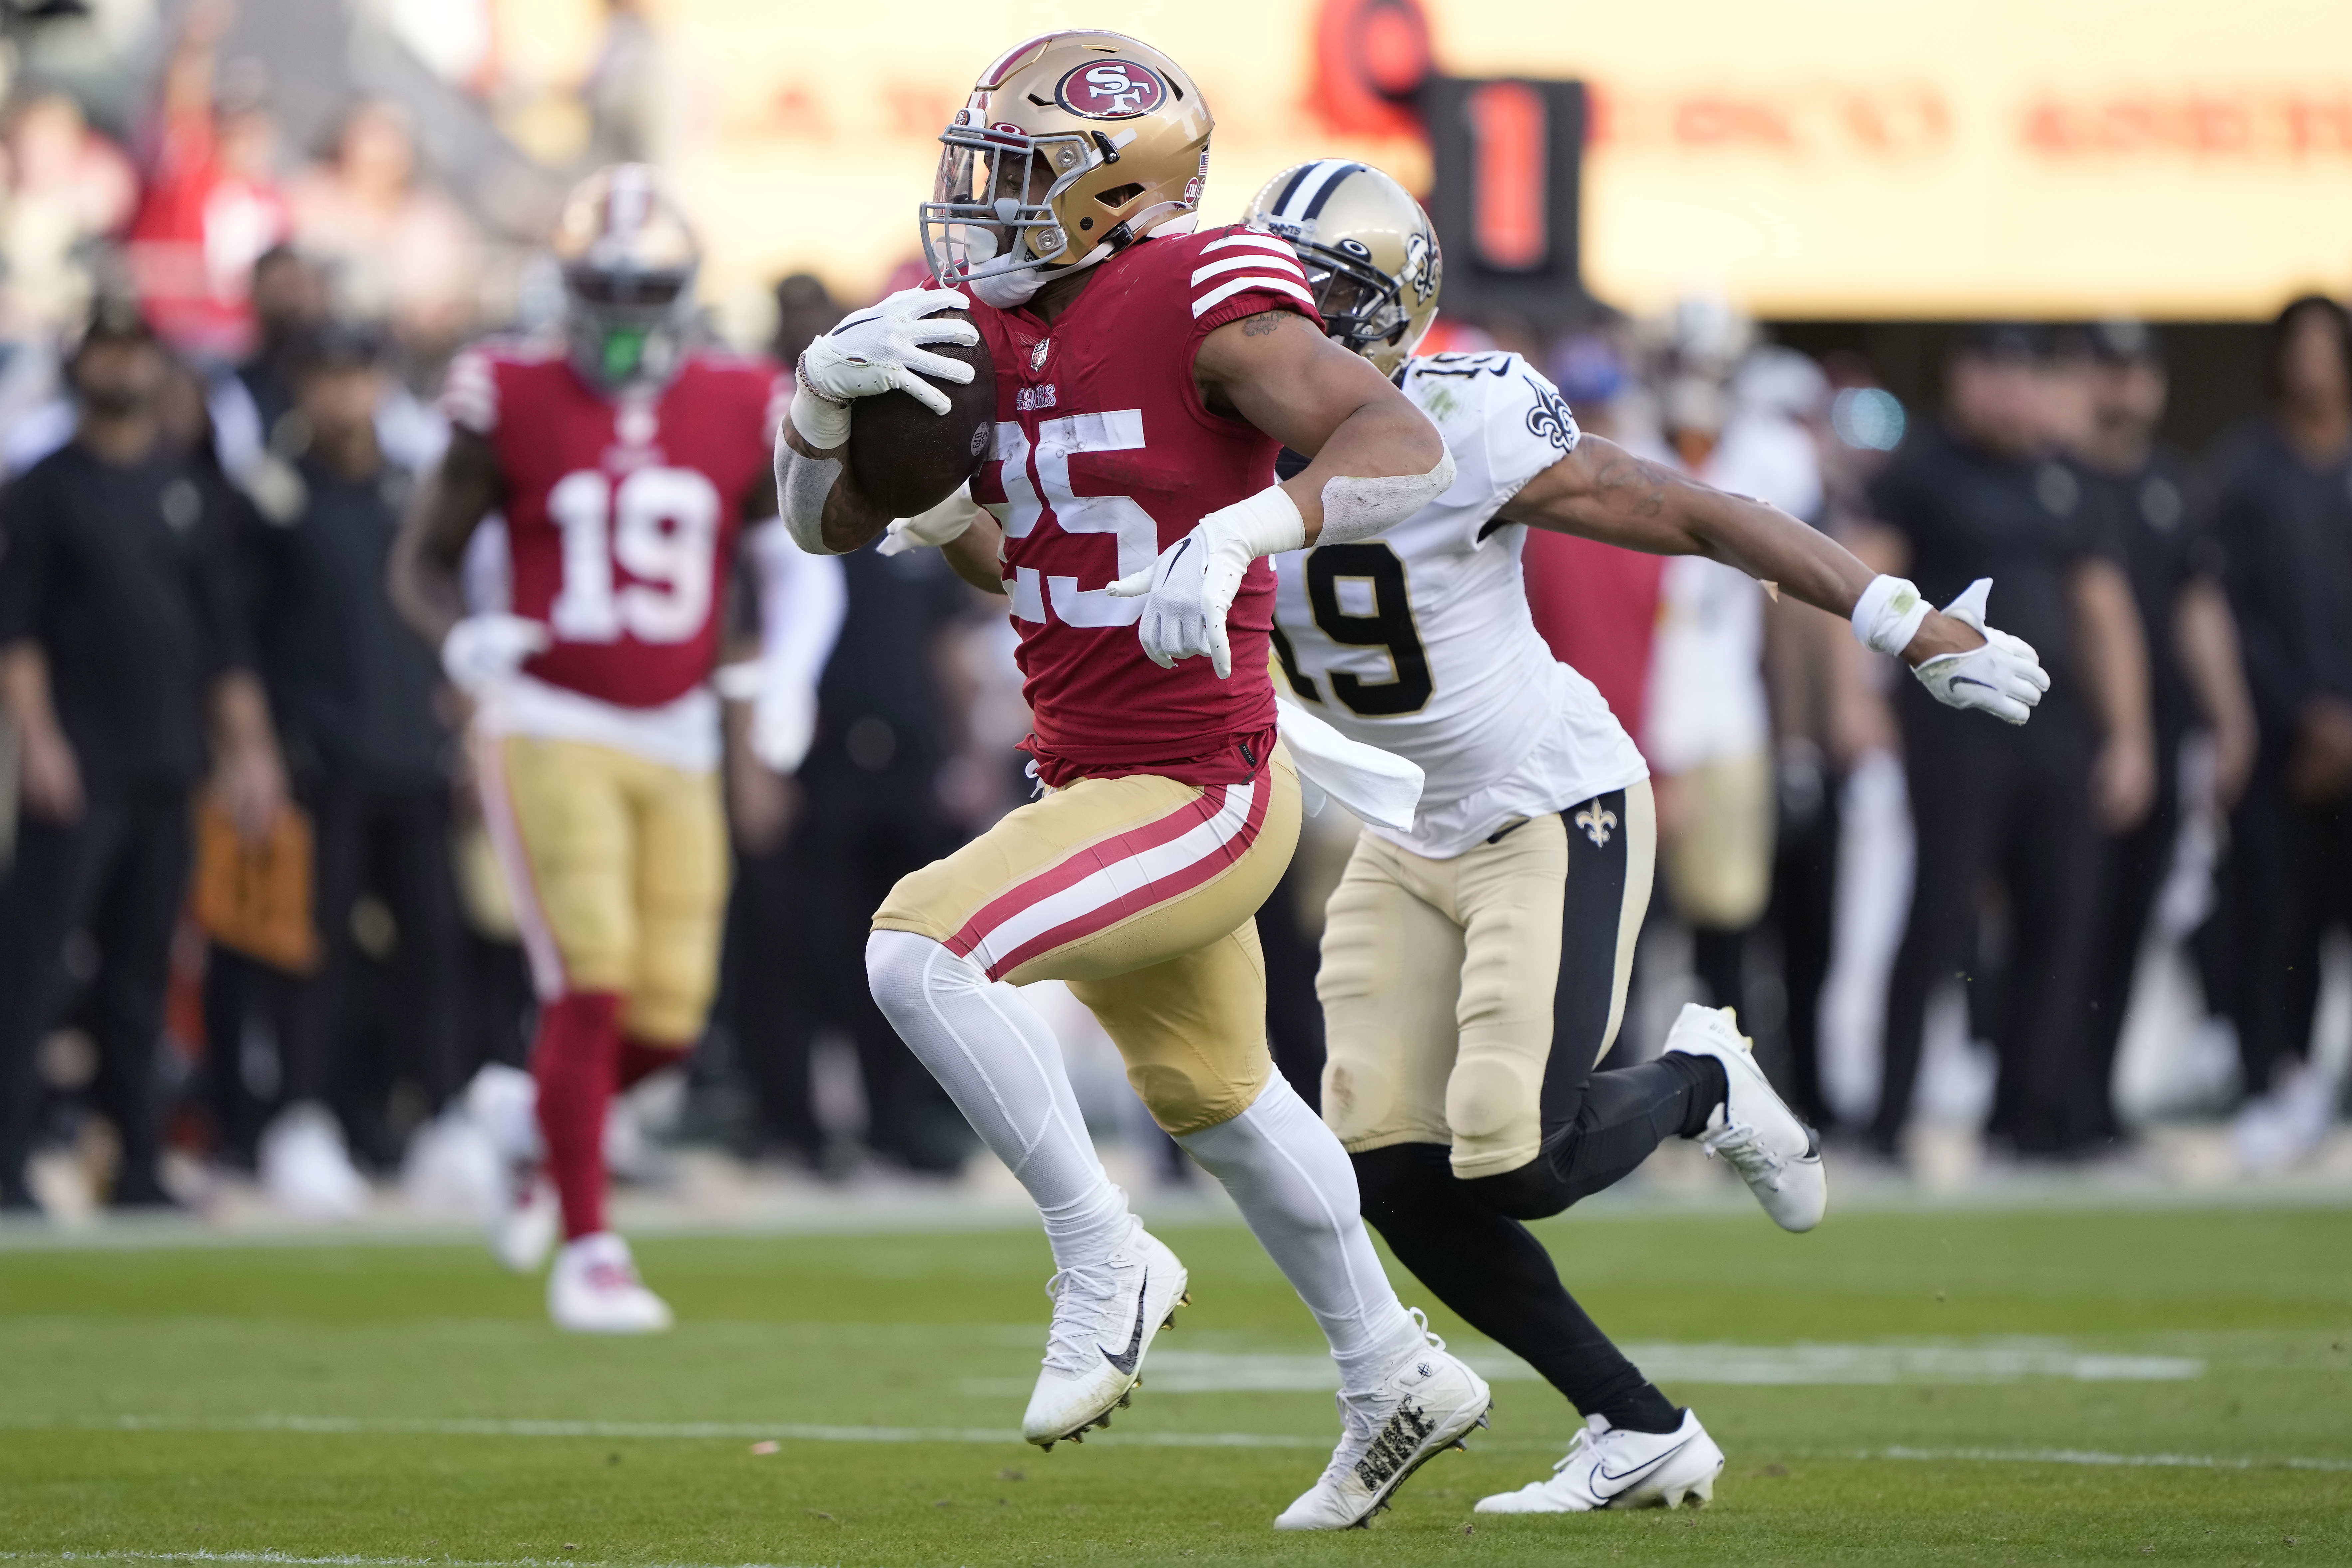 Elijah Mitchell #25 of the San Francisco 49ers runs with the ball during a game against the New Orleans Saints at Levi’s Stadium on November 27, 2022 in Santa Clara, California.